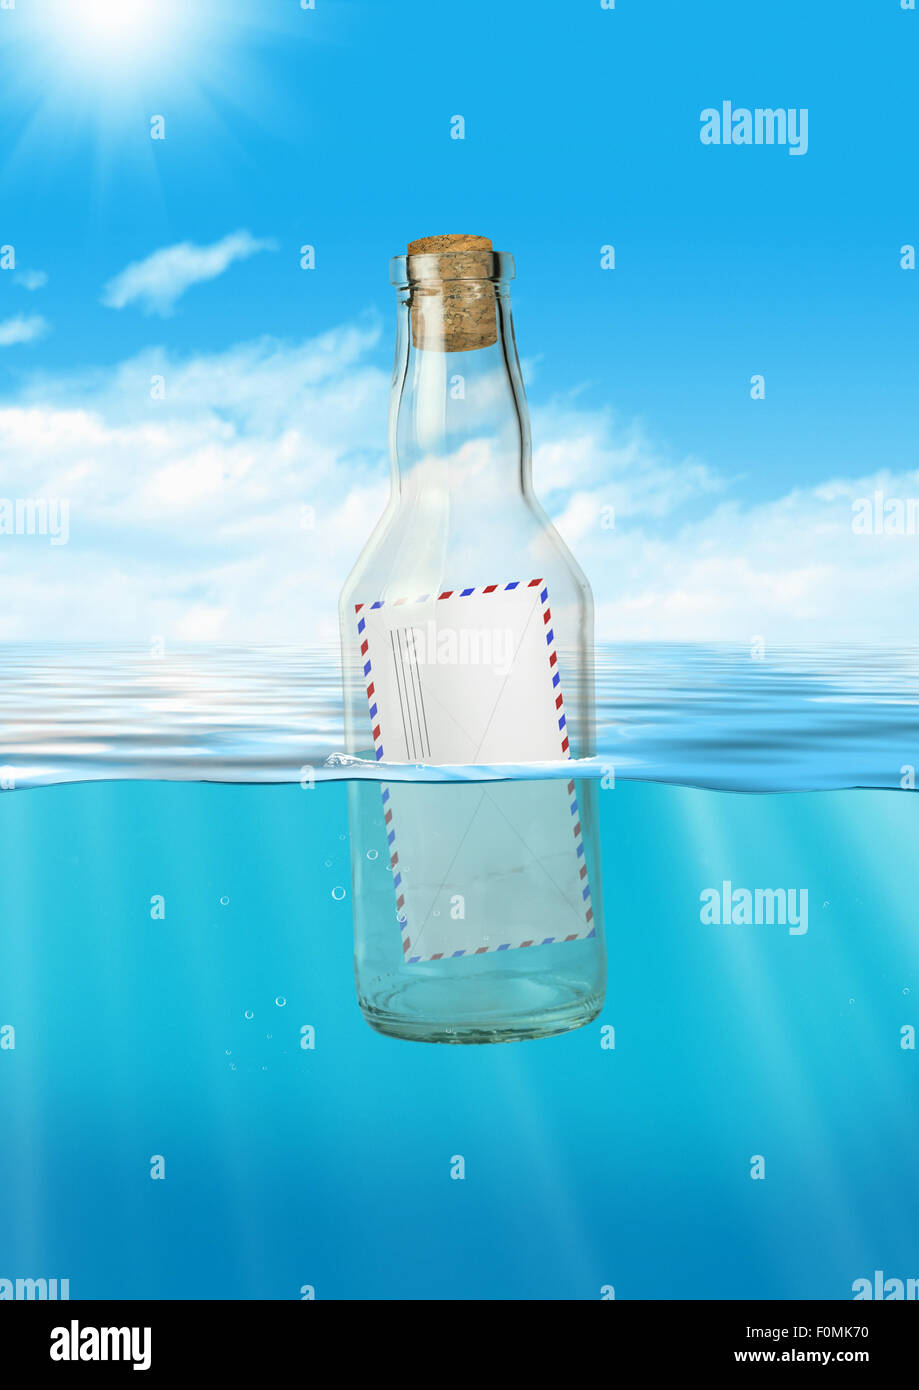 Mail in bottle float at sea, communication concept Stock Photo